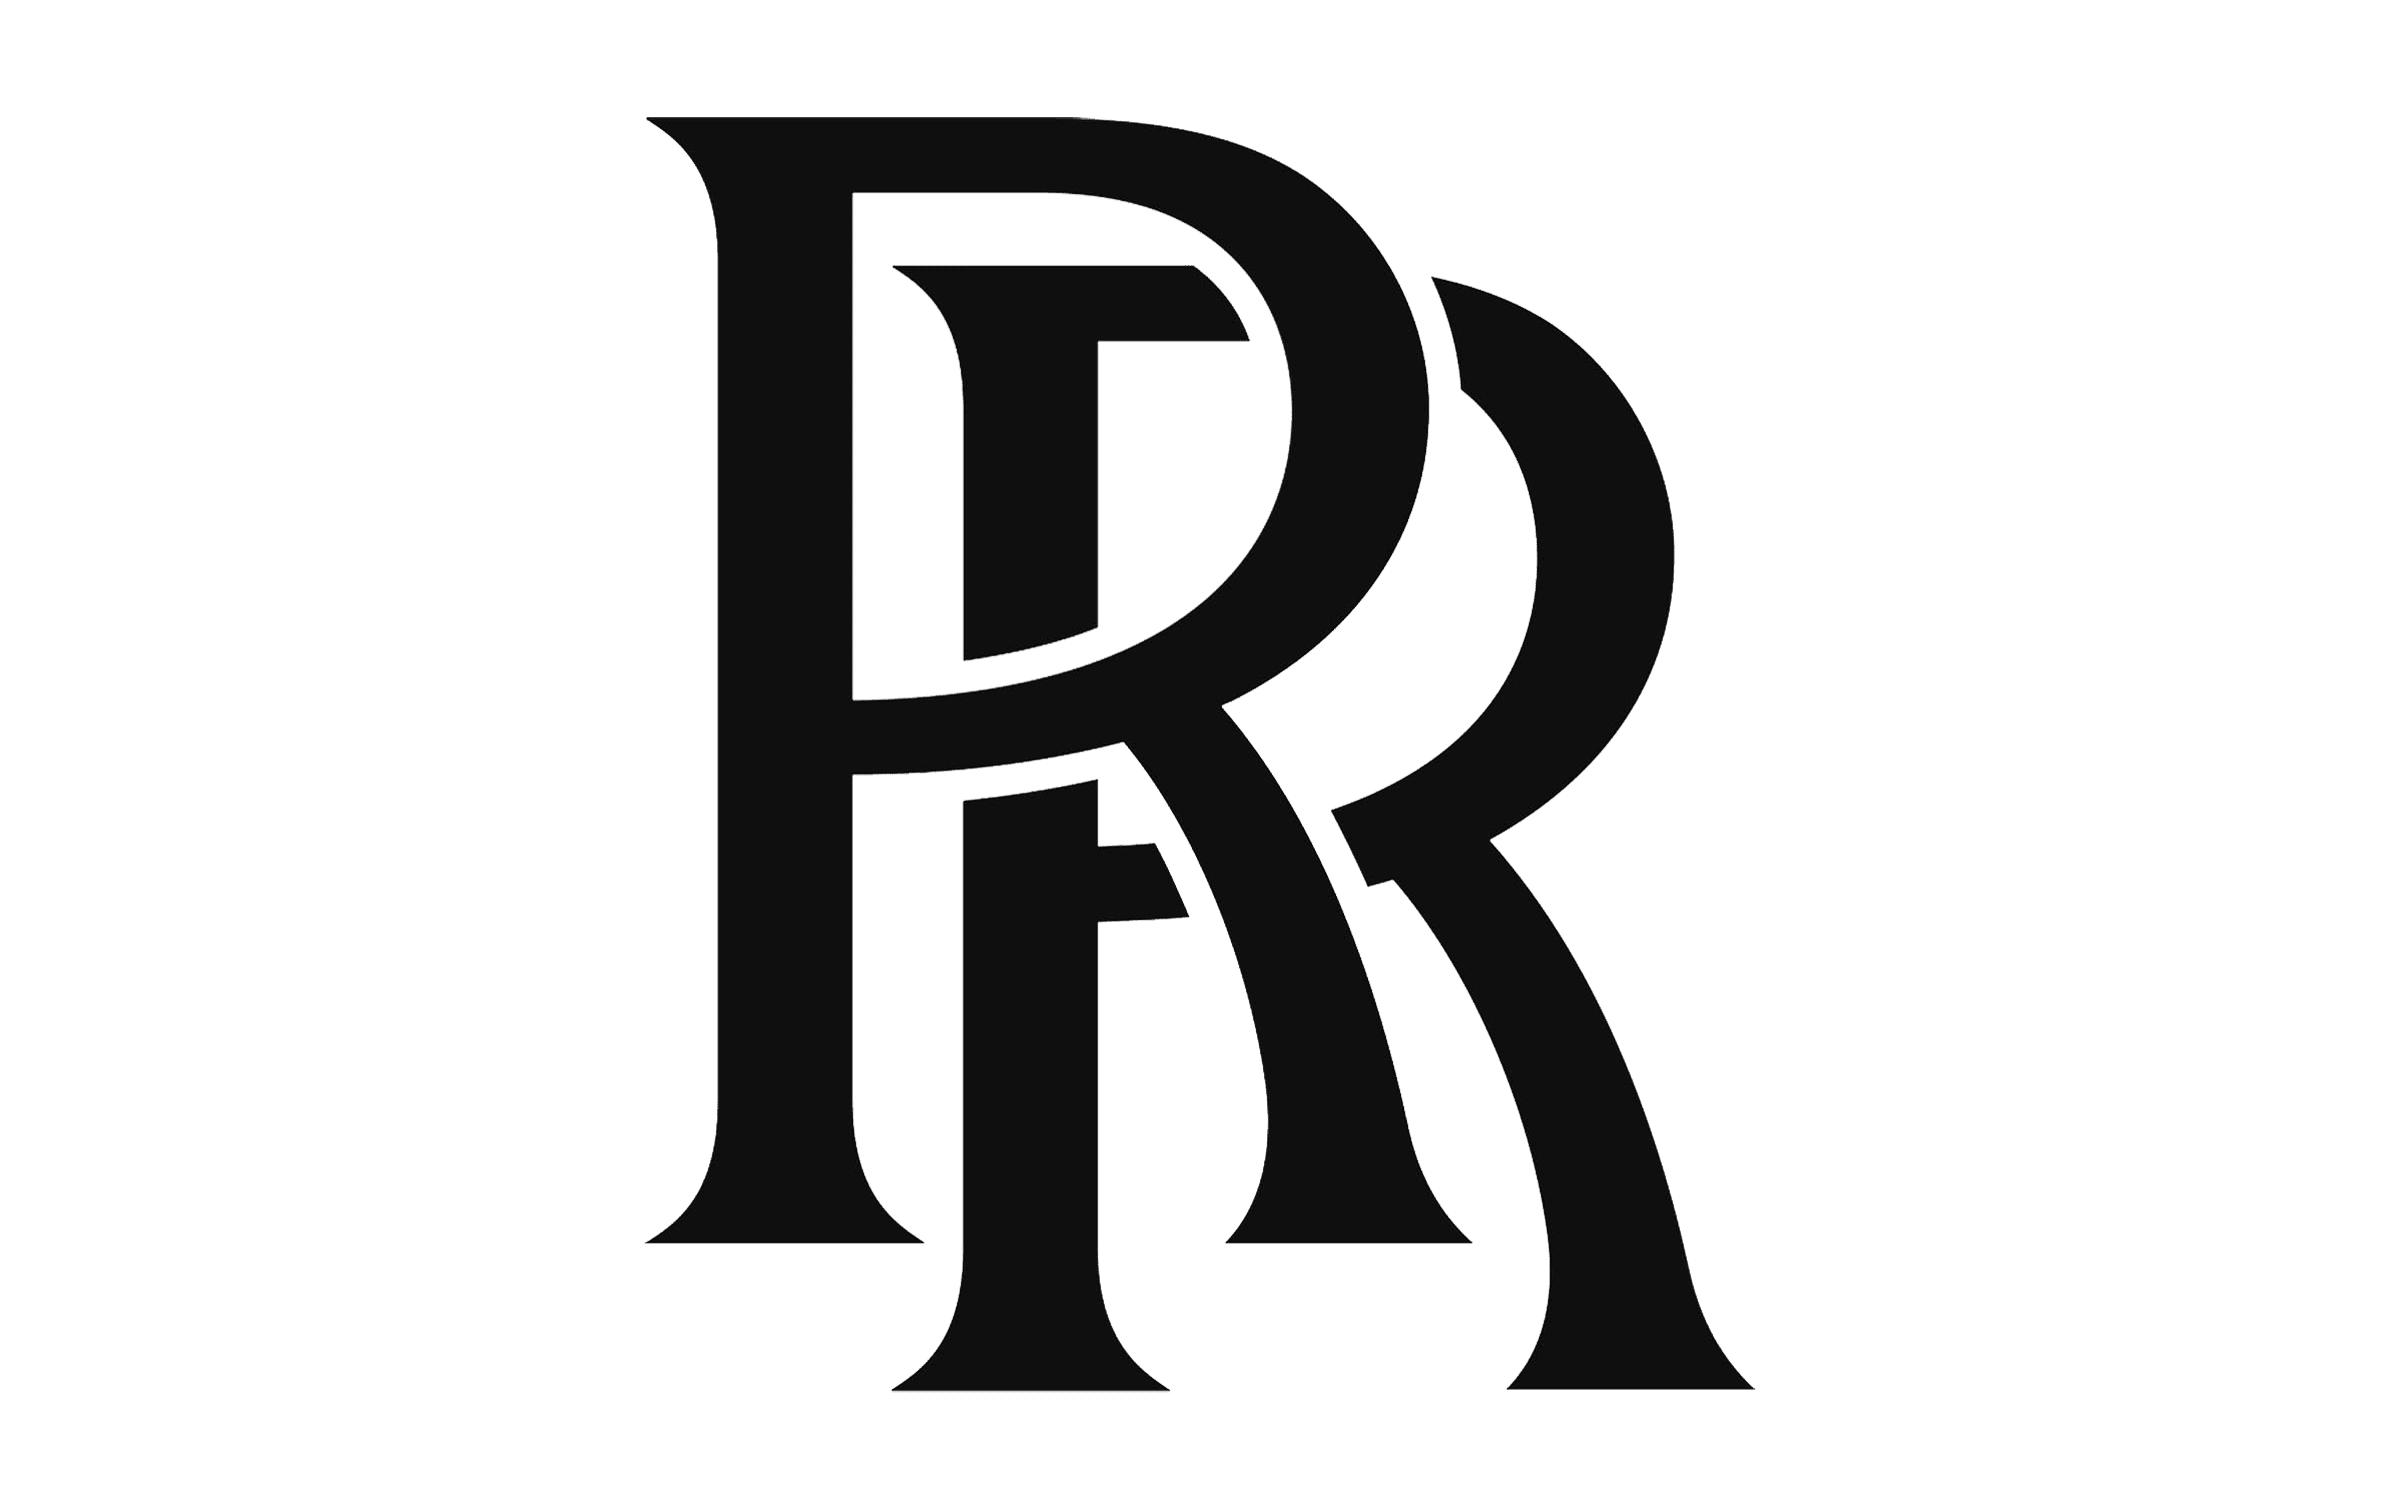 RollsRoyce Logo and symbol meaning history sign